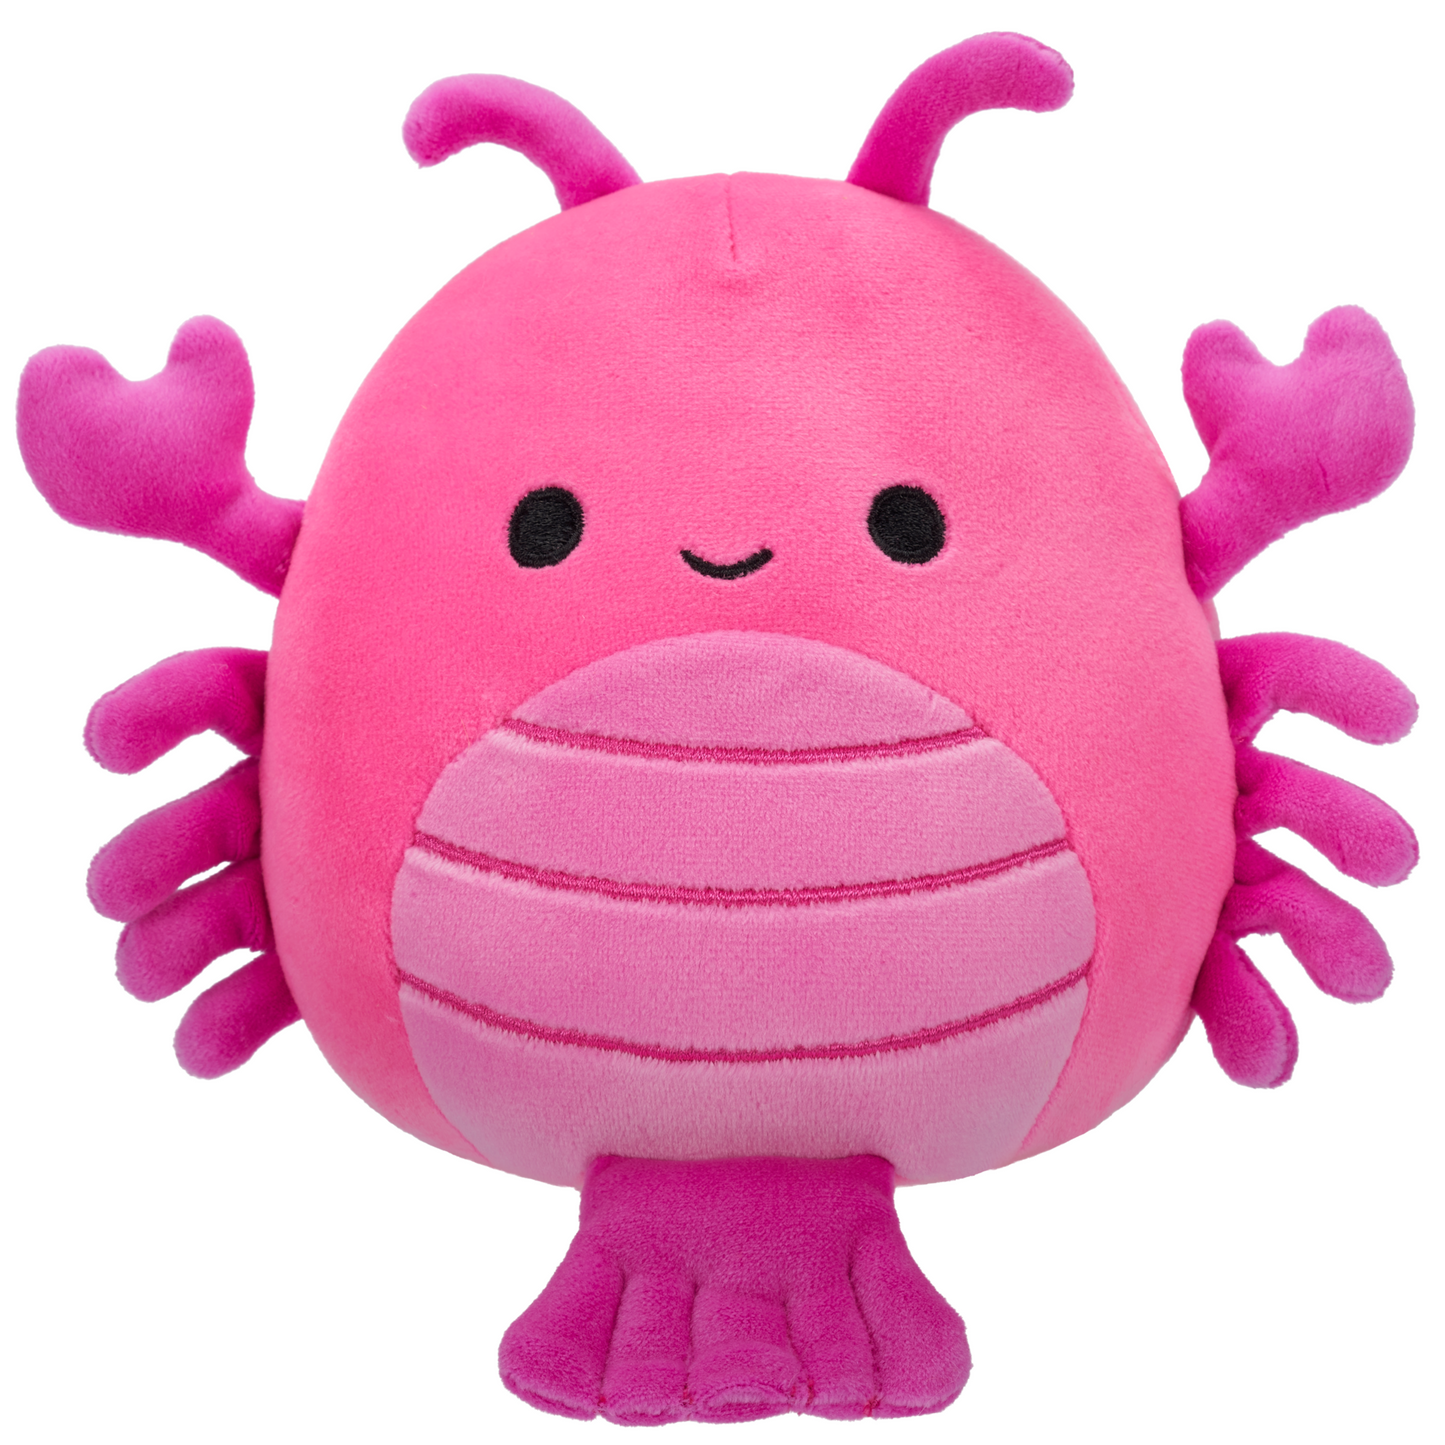 Cordea The Hot Pink Lobster 7.5" Squishmallows Plush